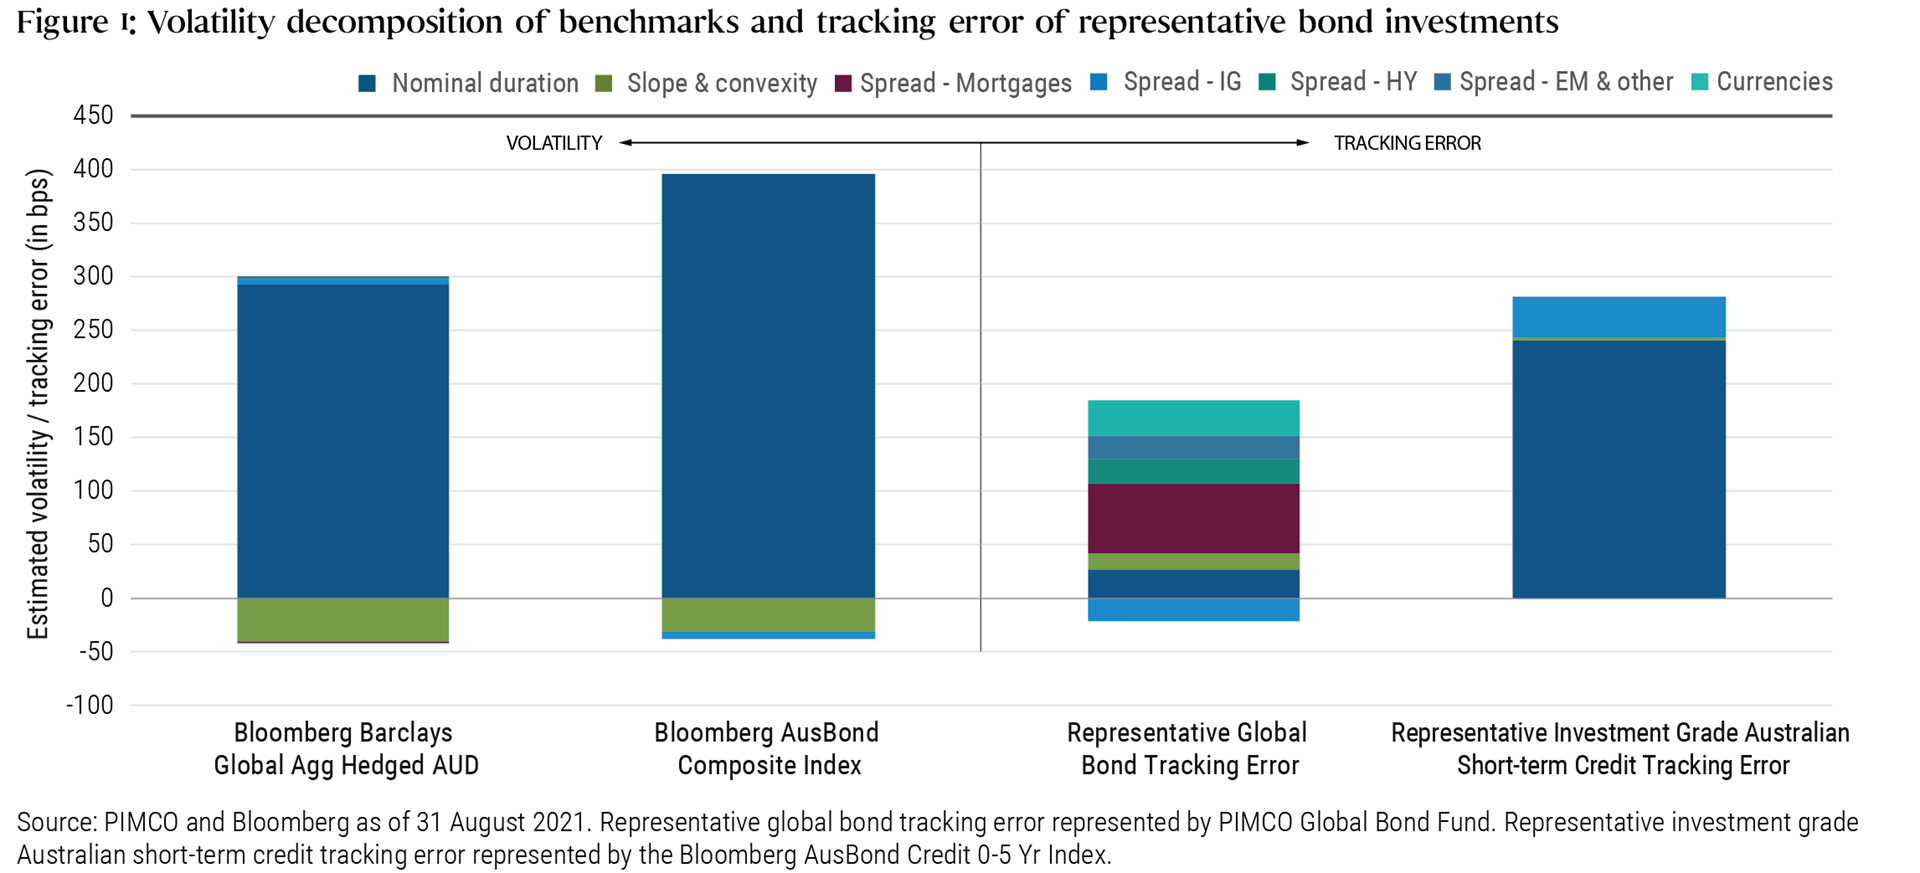 Figure 1: Volatility decomposition of benchmarks and tracking error of representative bond investments